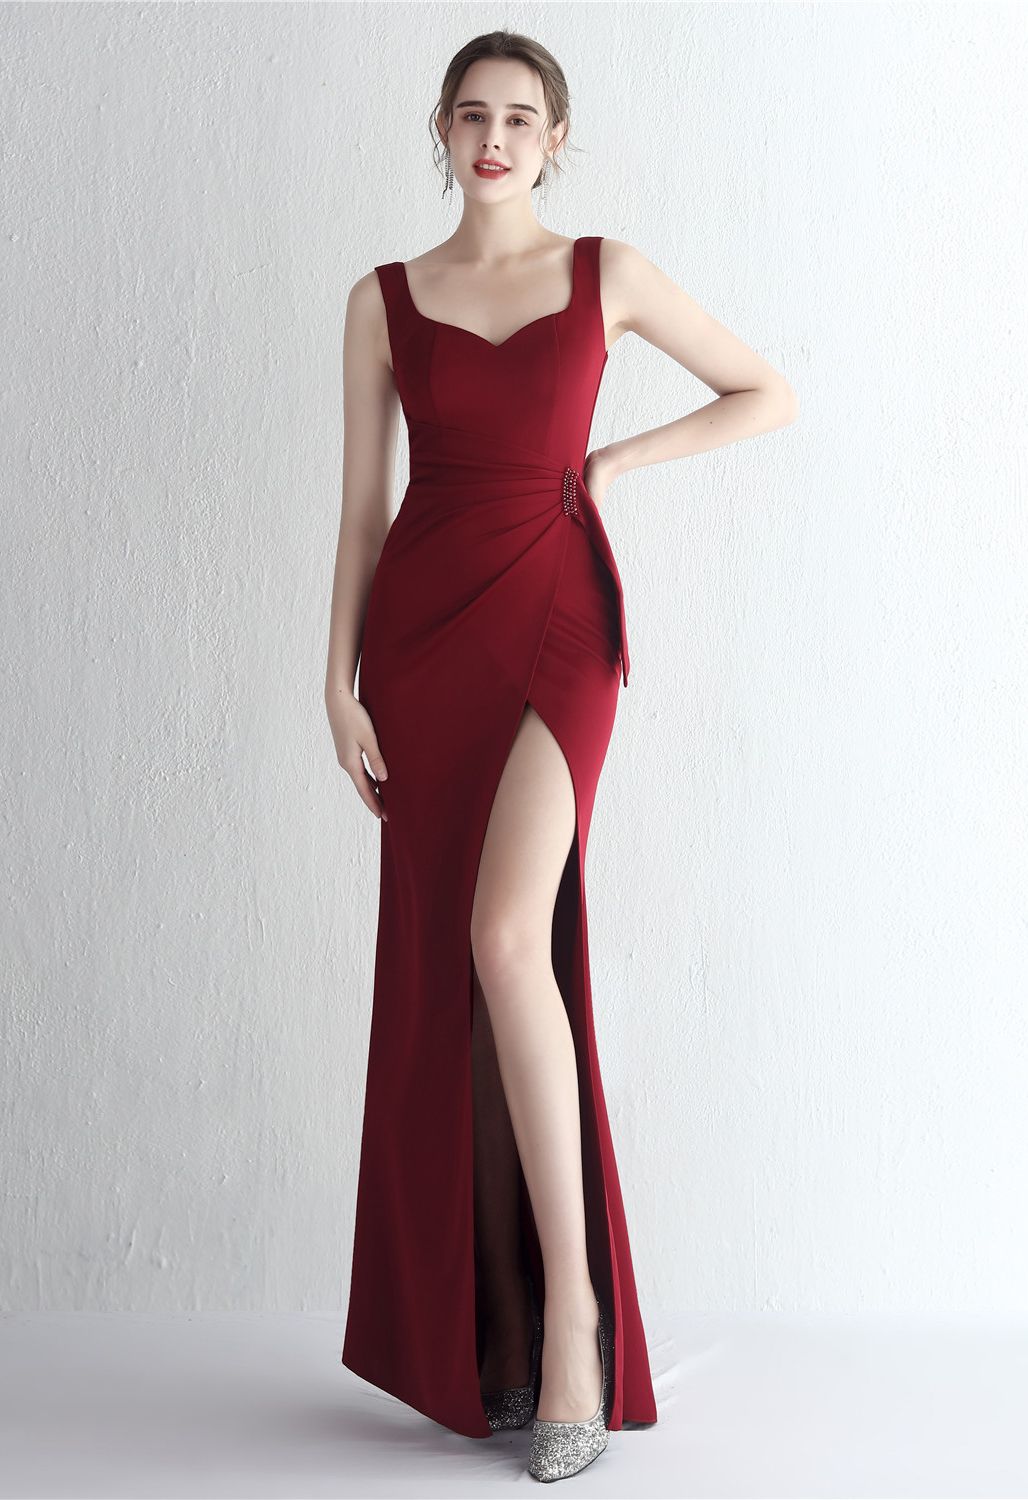 Ruched Waist High Slit Gown in Burgundy - Retro, Indie and Unique Fashion